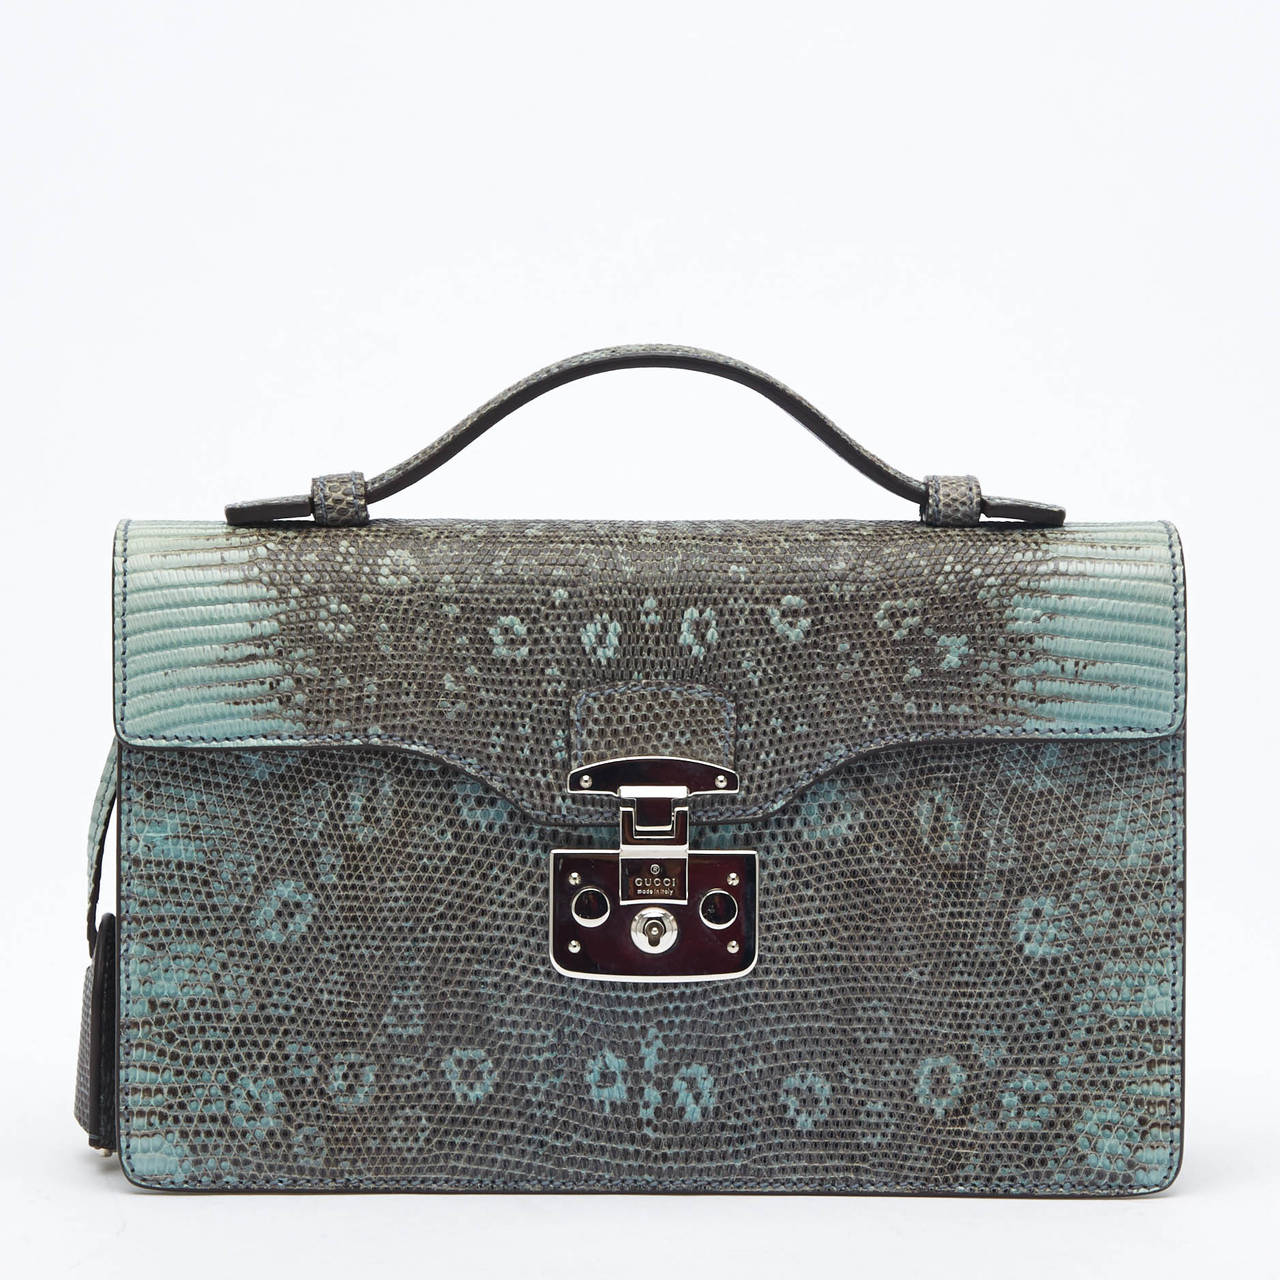 This petite Gucci Lady Lock Briefcase Clutch in Python is beautiful, and the perfect small accessory for the most stylish business person or a night out. This briefcase is featured in pastel green and gray with a contrasting wine suede interior, and